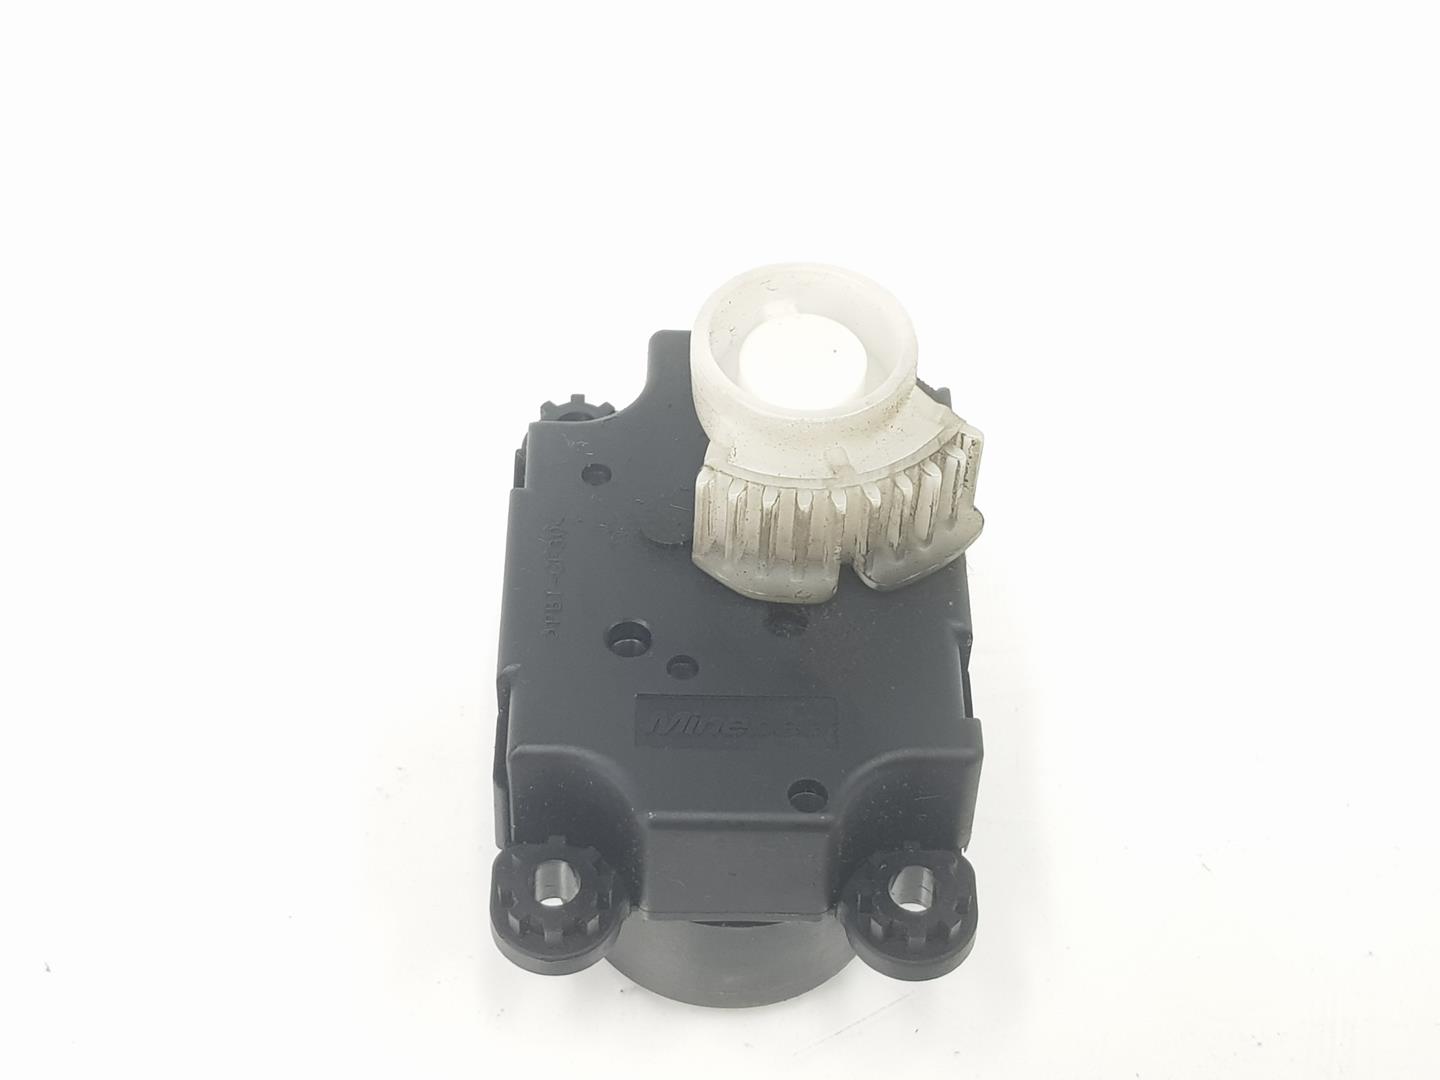 RENAULT Master 3 generation (2010-2023) Air Conditioner Air Flow Valve Motor A21200800, A21200800 24236542